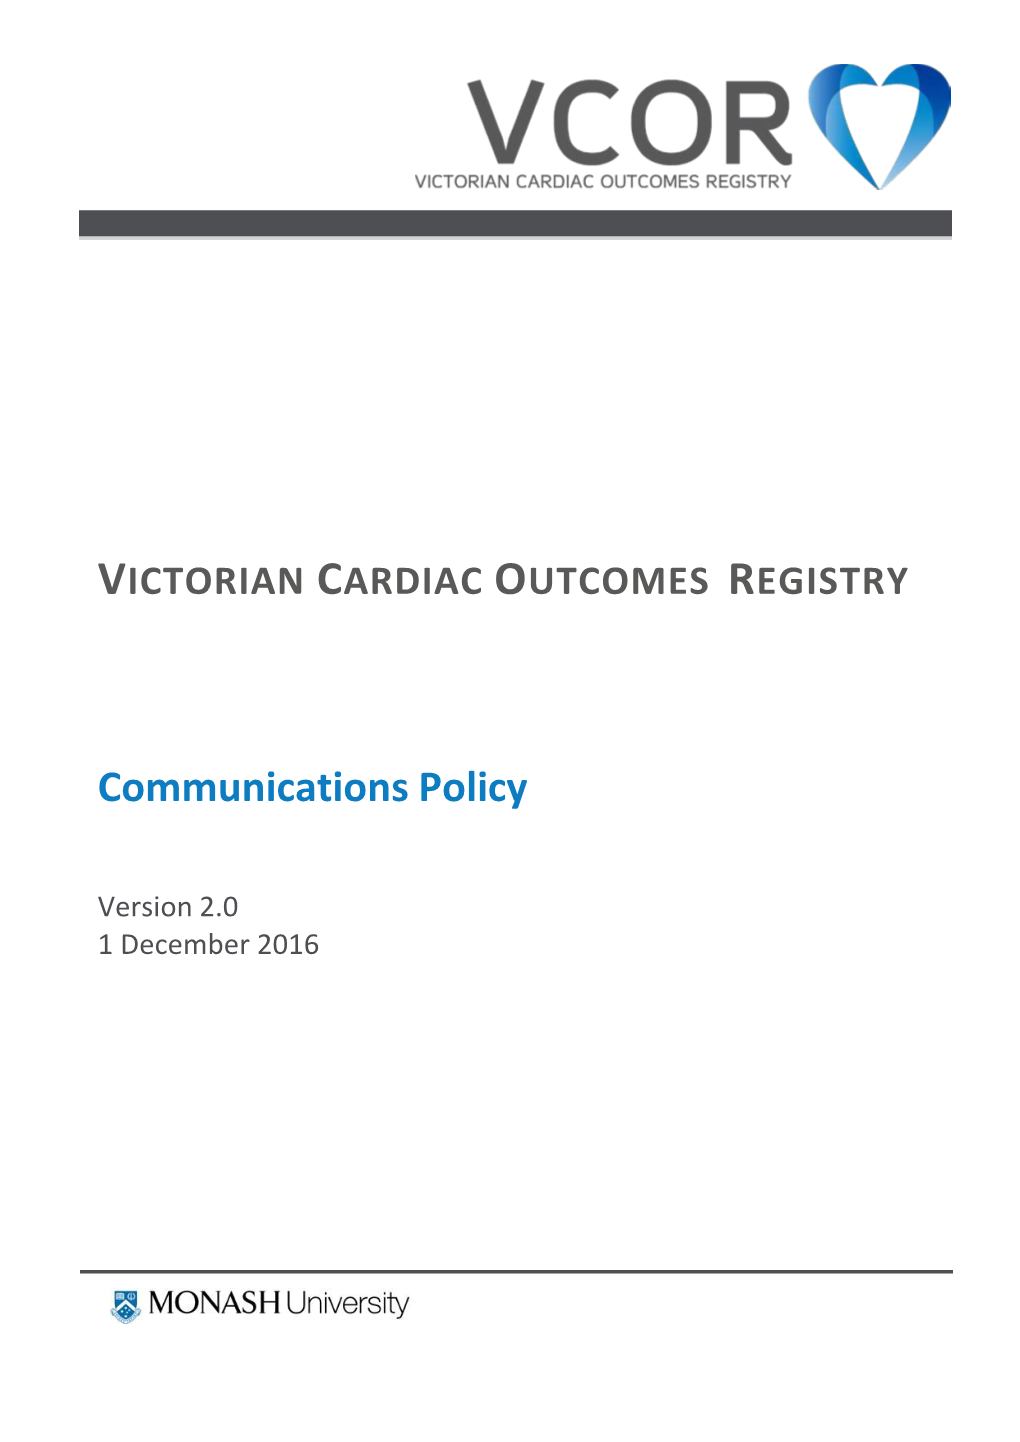 VCOR Communications Policy V2.0 Updated By: R Brien & H Carruthers Updated: 1-DEC-2016 Page 2 of 14